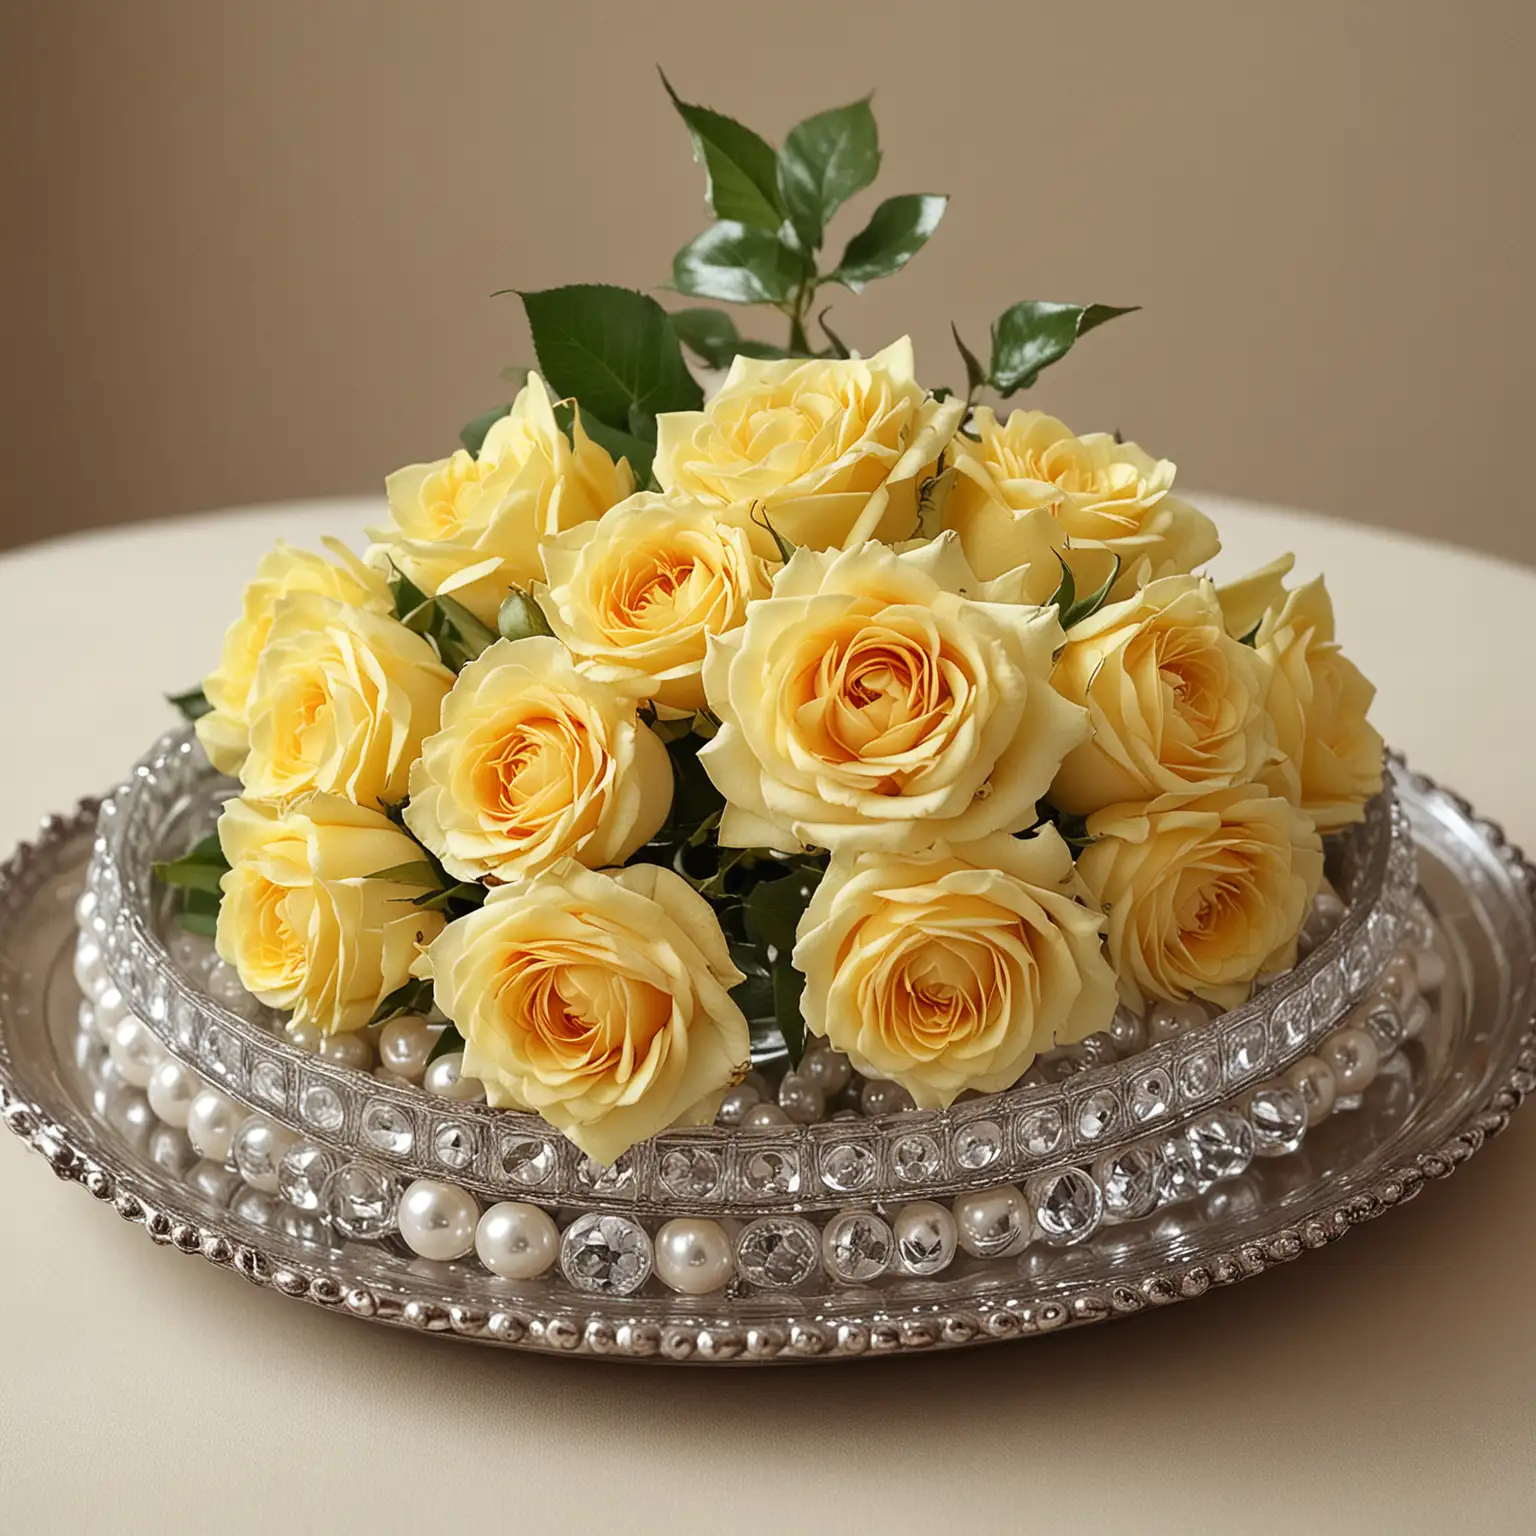 small vintage centerpiece with crystal tray holding a few yellow roses and a strand of pearls draped over the roses; keep background neutral